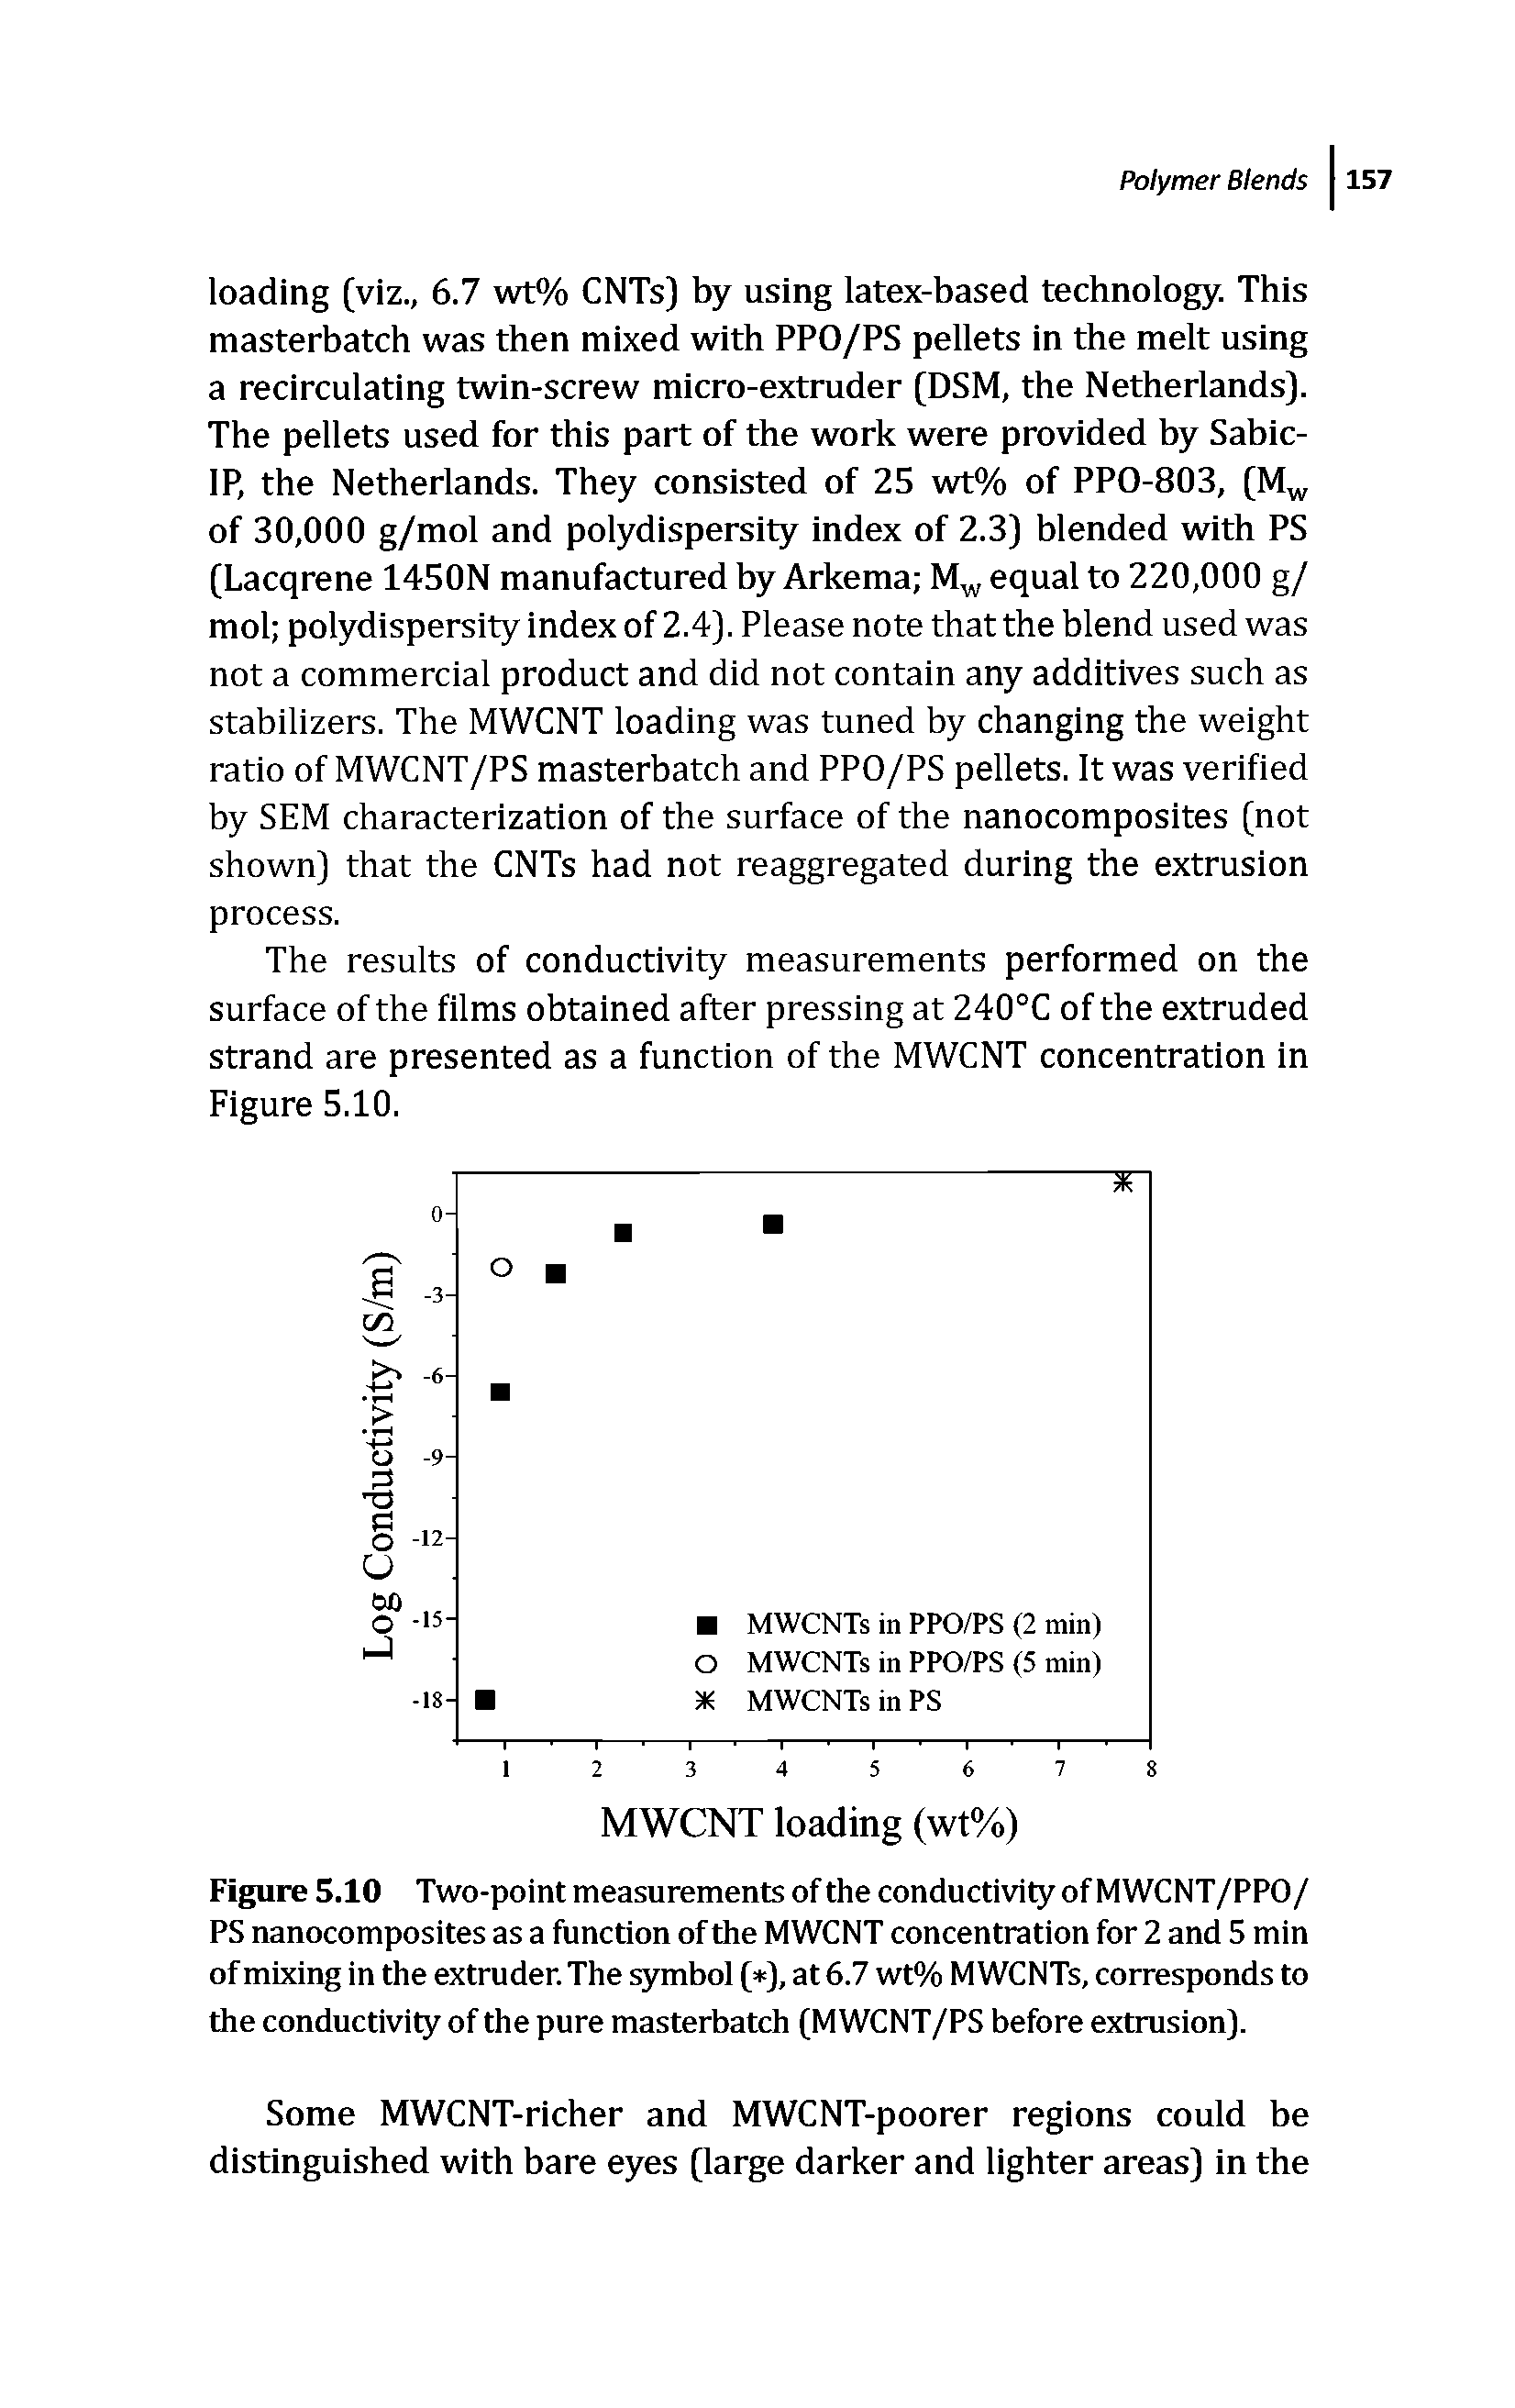 Figure 5.10 Two-point measurements of the conductivity of MWCNT/PPO/ PS nanocomposites as a function of the MWCNT concentration for 2 and 5 min of mixing in the extruder. The symbol ( ), at 6.7 wt% MWCNTs, corresponds to the conductivity of the pure masterbatch (MWCNT /PS before extrusion).